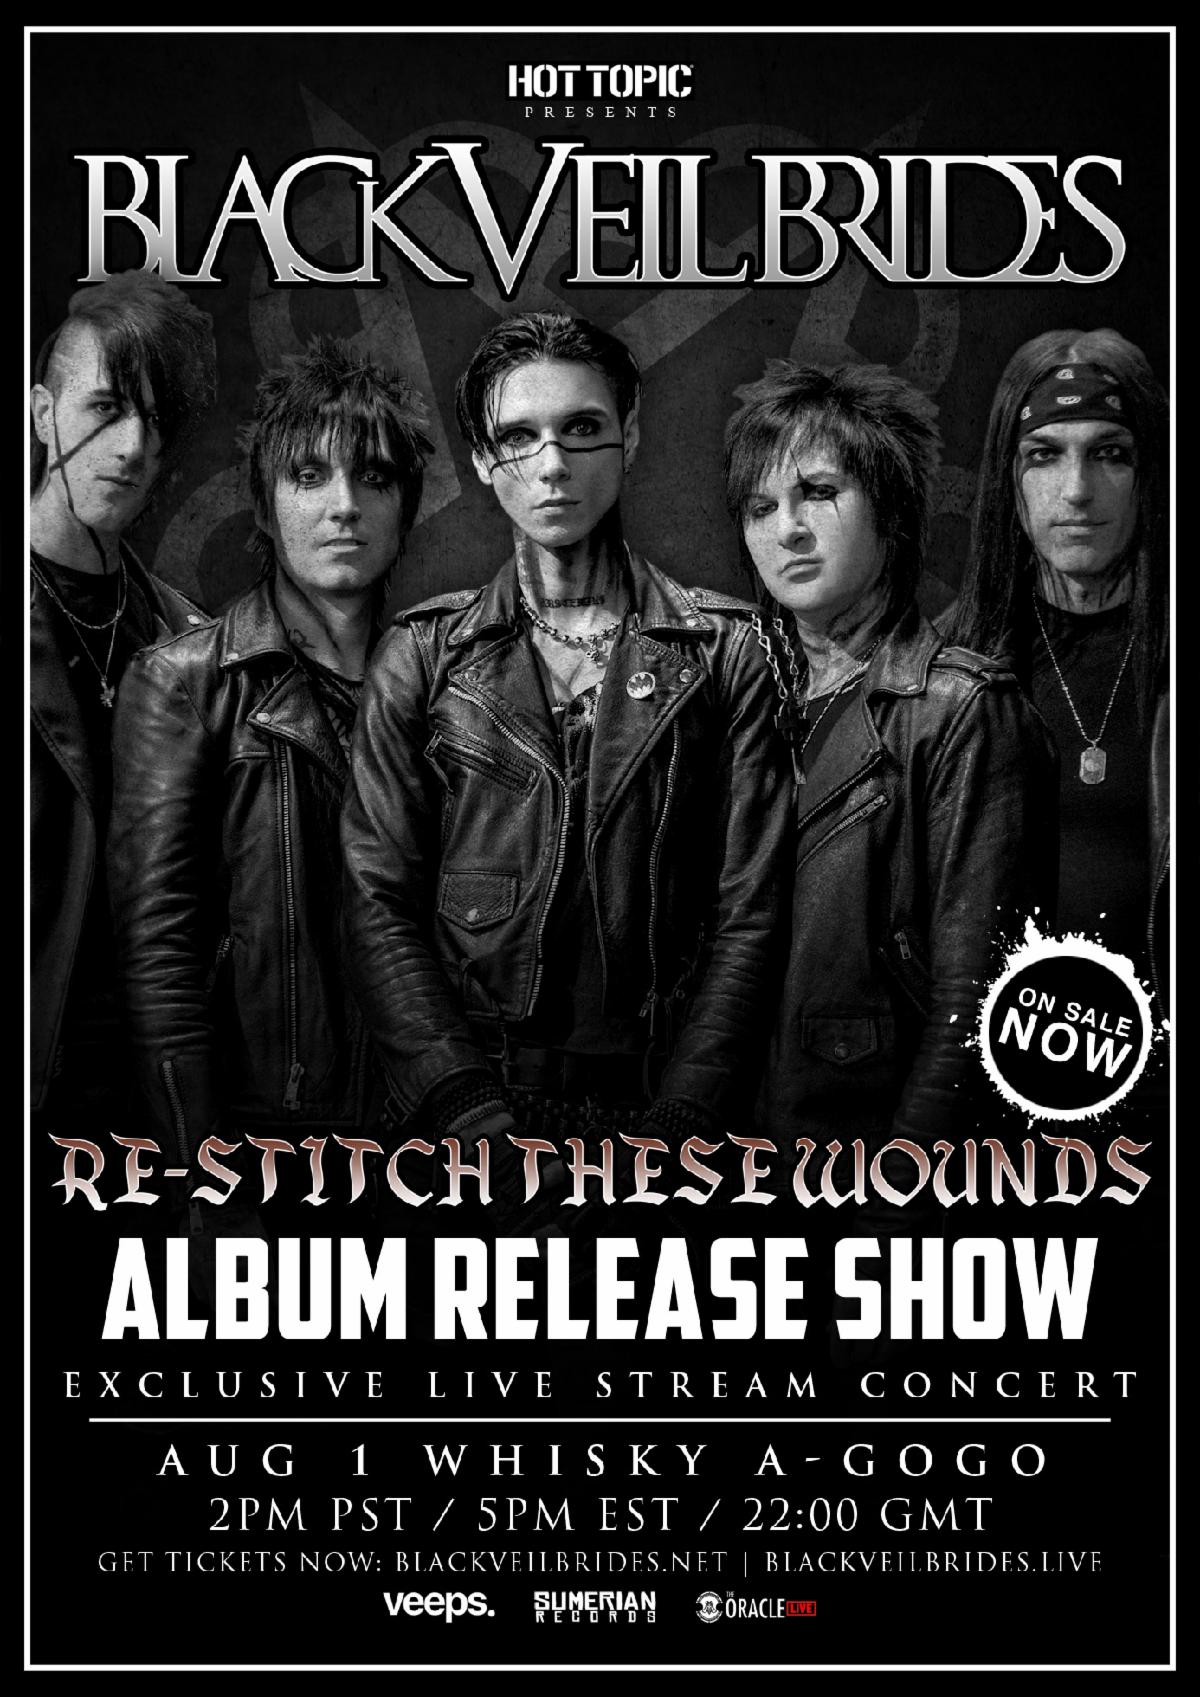 Black Veil Brides Announce 'Re-Stitch These Wounds' And Special Live Stream Album Release Show